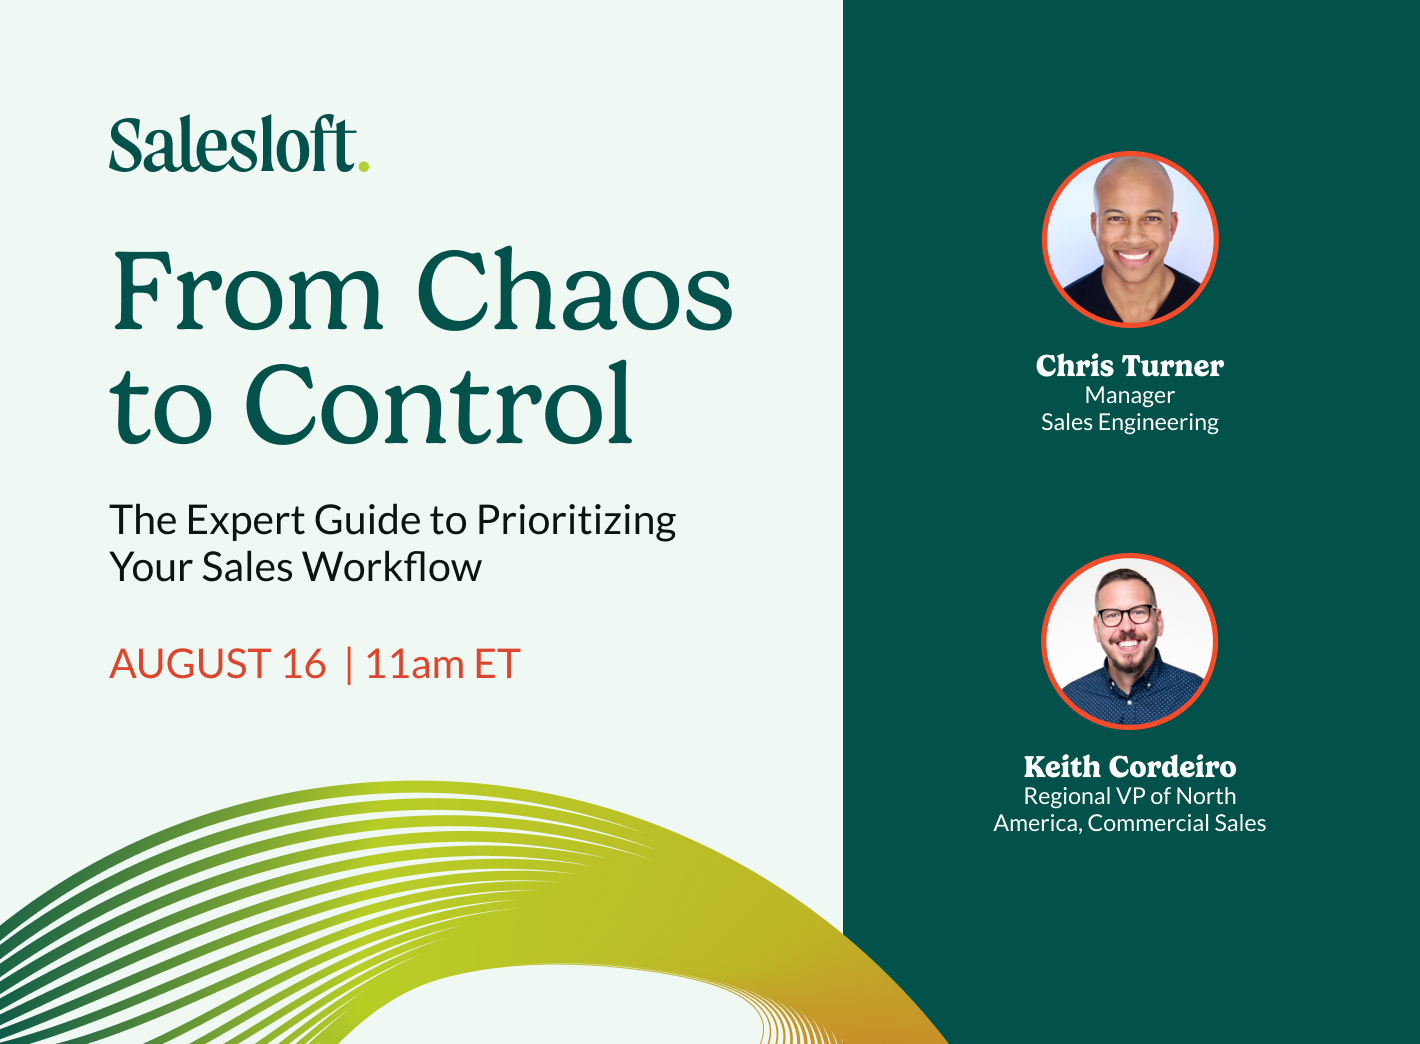 From Chaos to Control: The Expert Guide to Prioritizing Your Sales Workflow